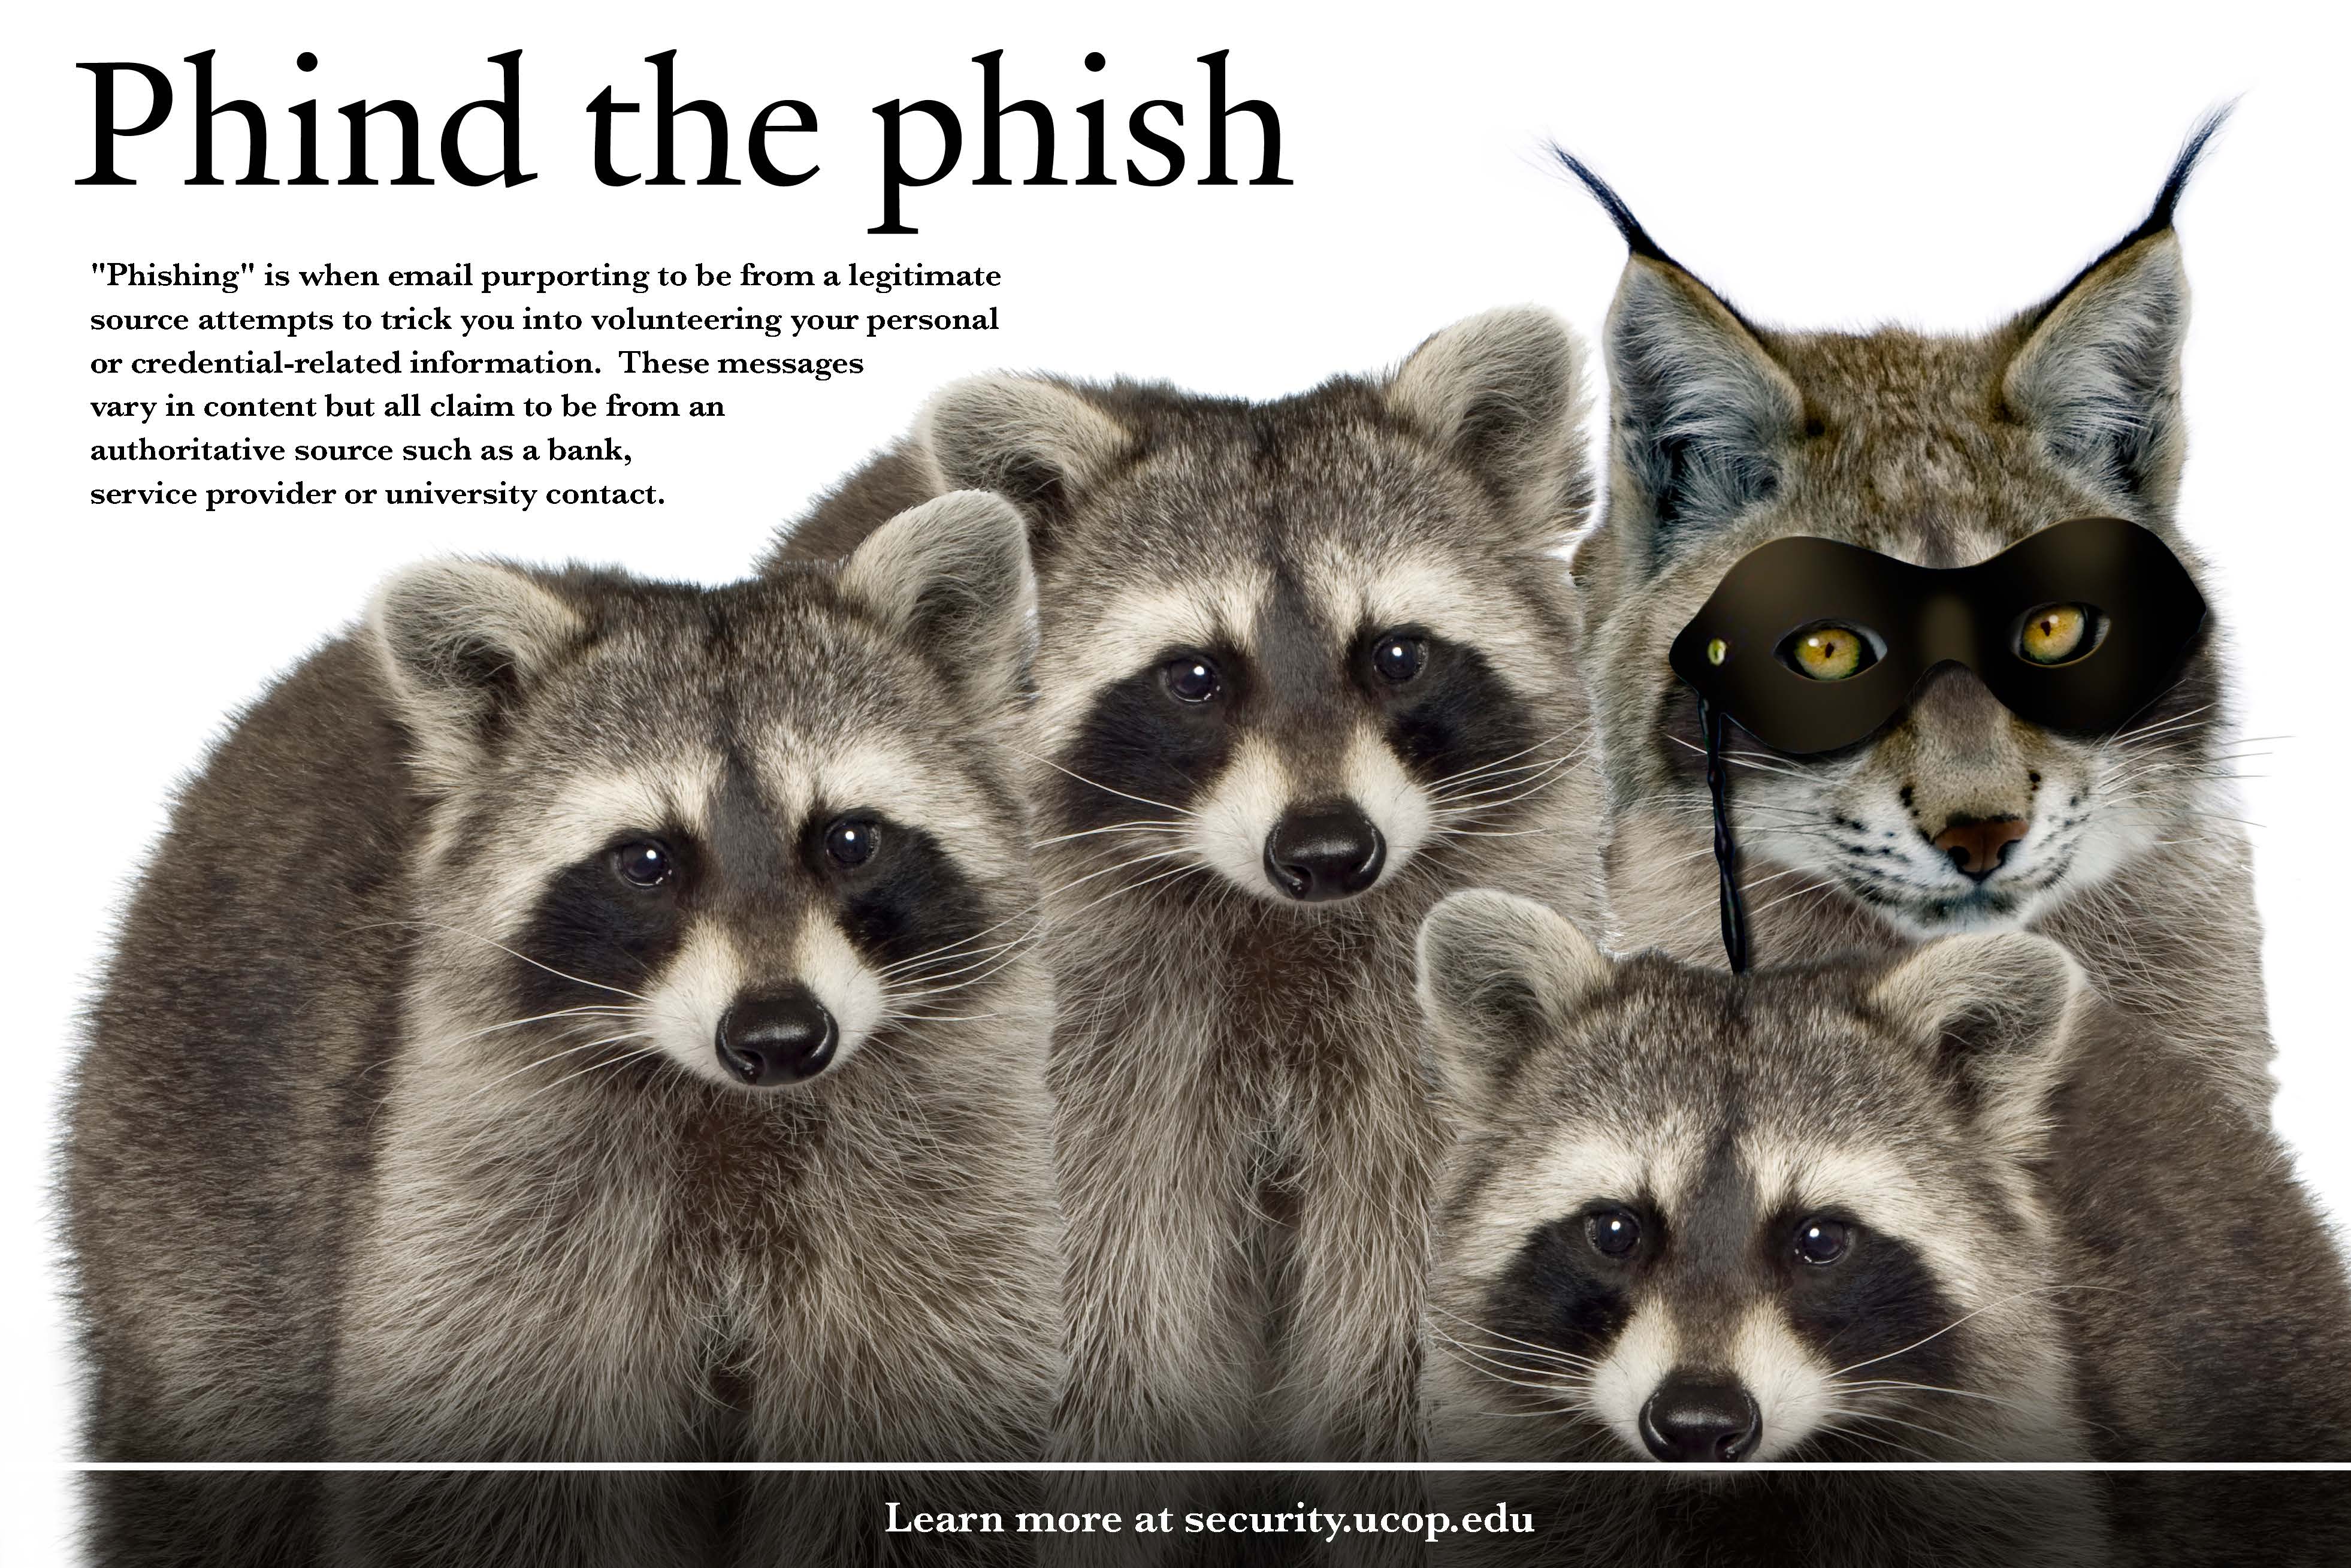 Flyer: Phind the phish. -  Racoon Bobcat